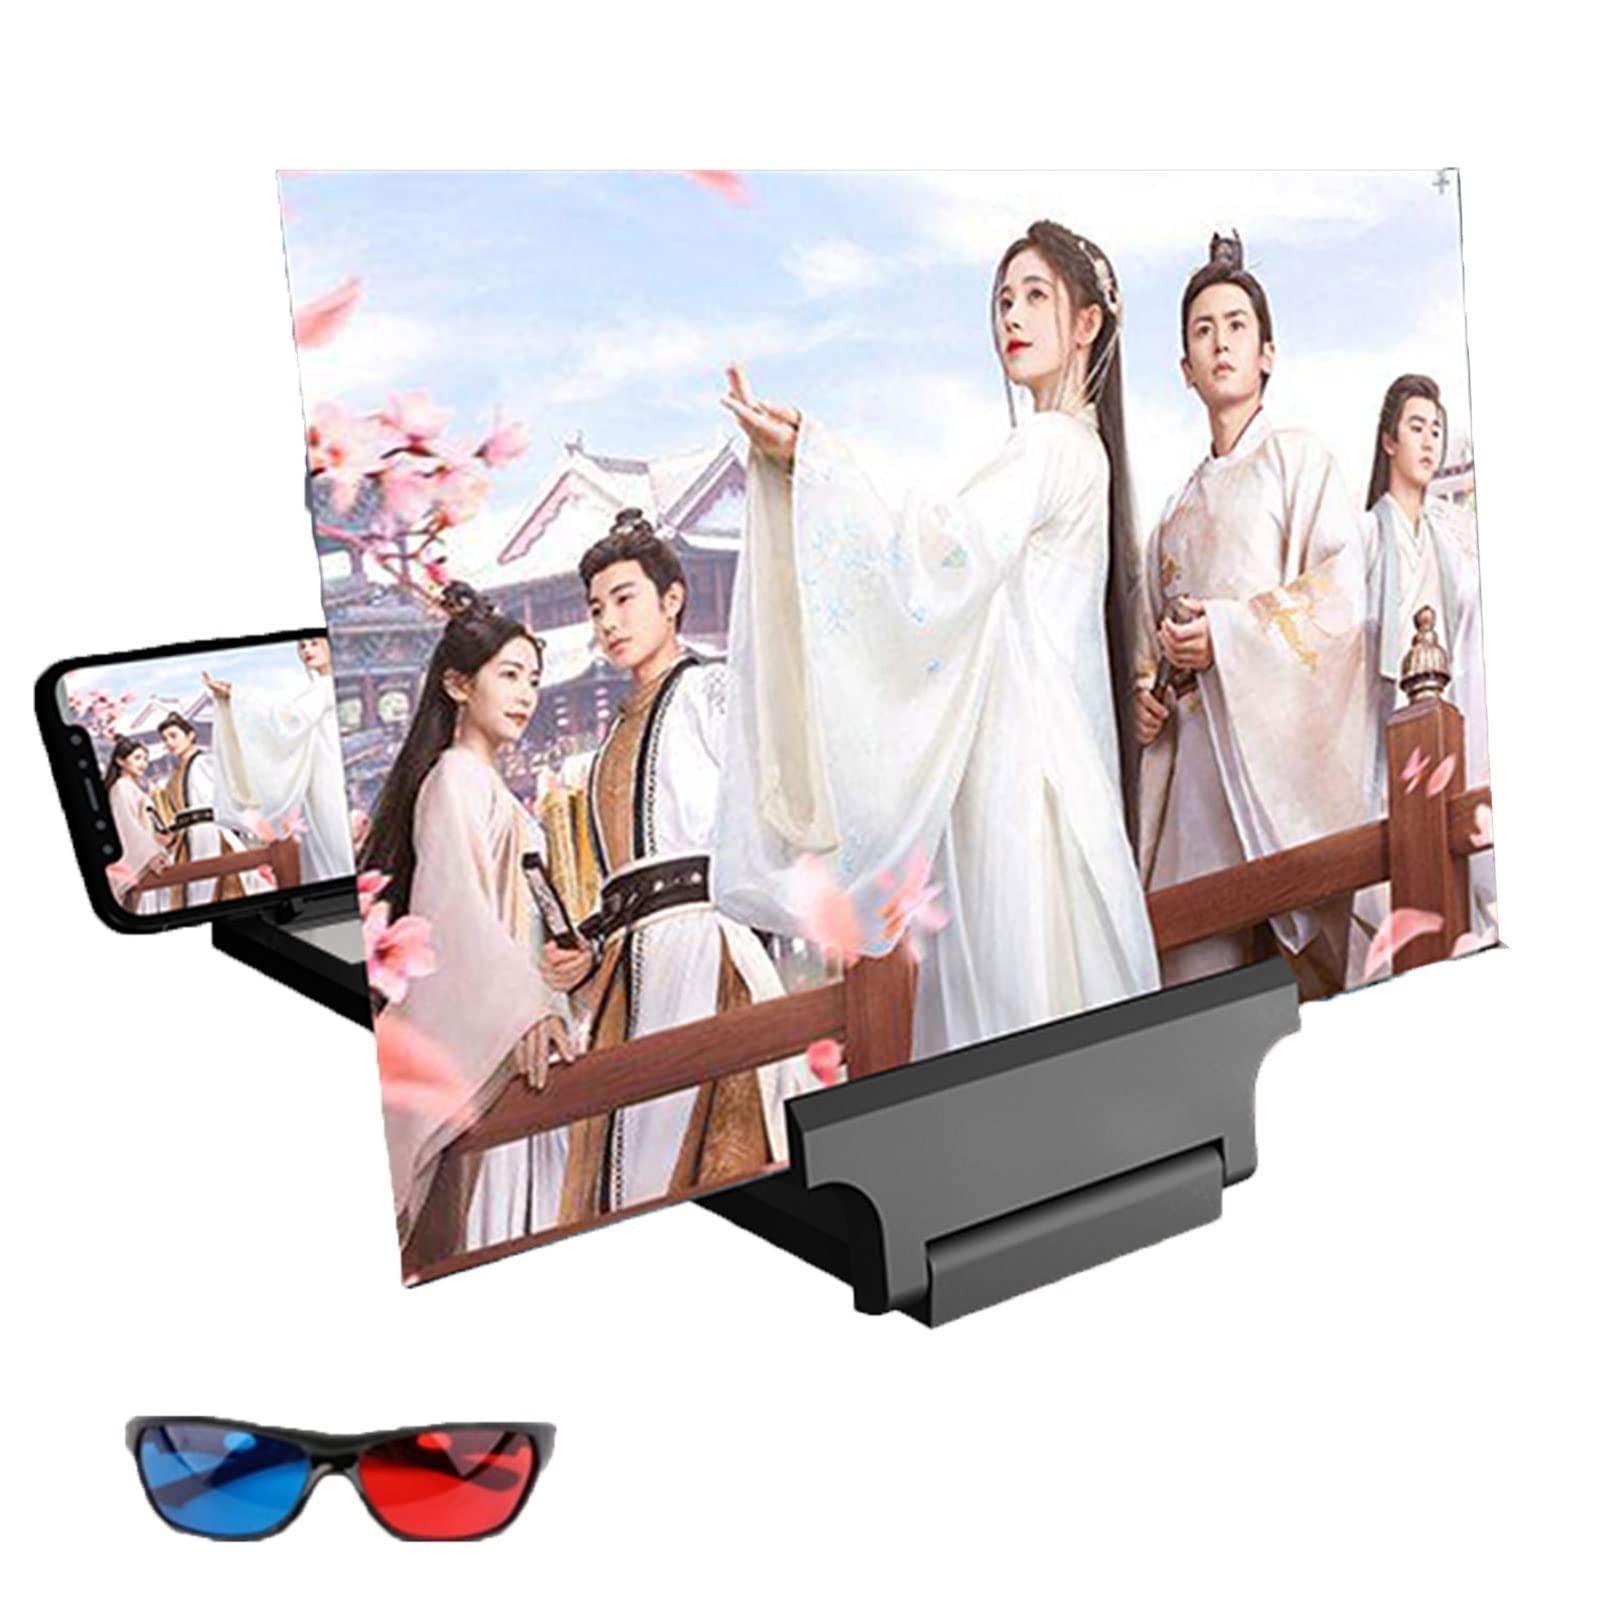 GXDJC 14/20/28/42 Inch Screen Magnifier for Smartphone,Mobile Phone 3D Magnifier Projector Screen for Movies, Videos, and Gaming,Compatible with All Smartphones (Color : Black+Glasses, Size : 42inch)